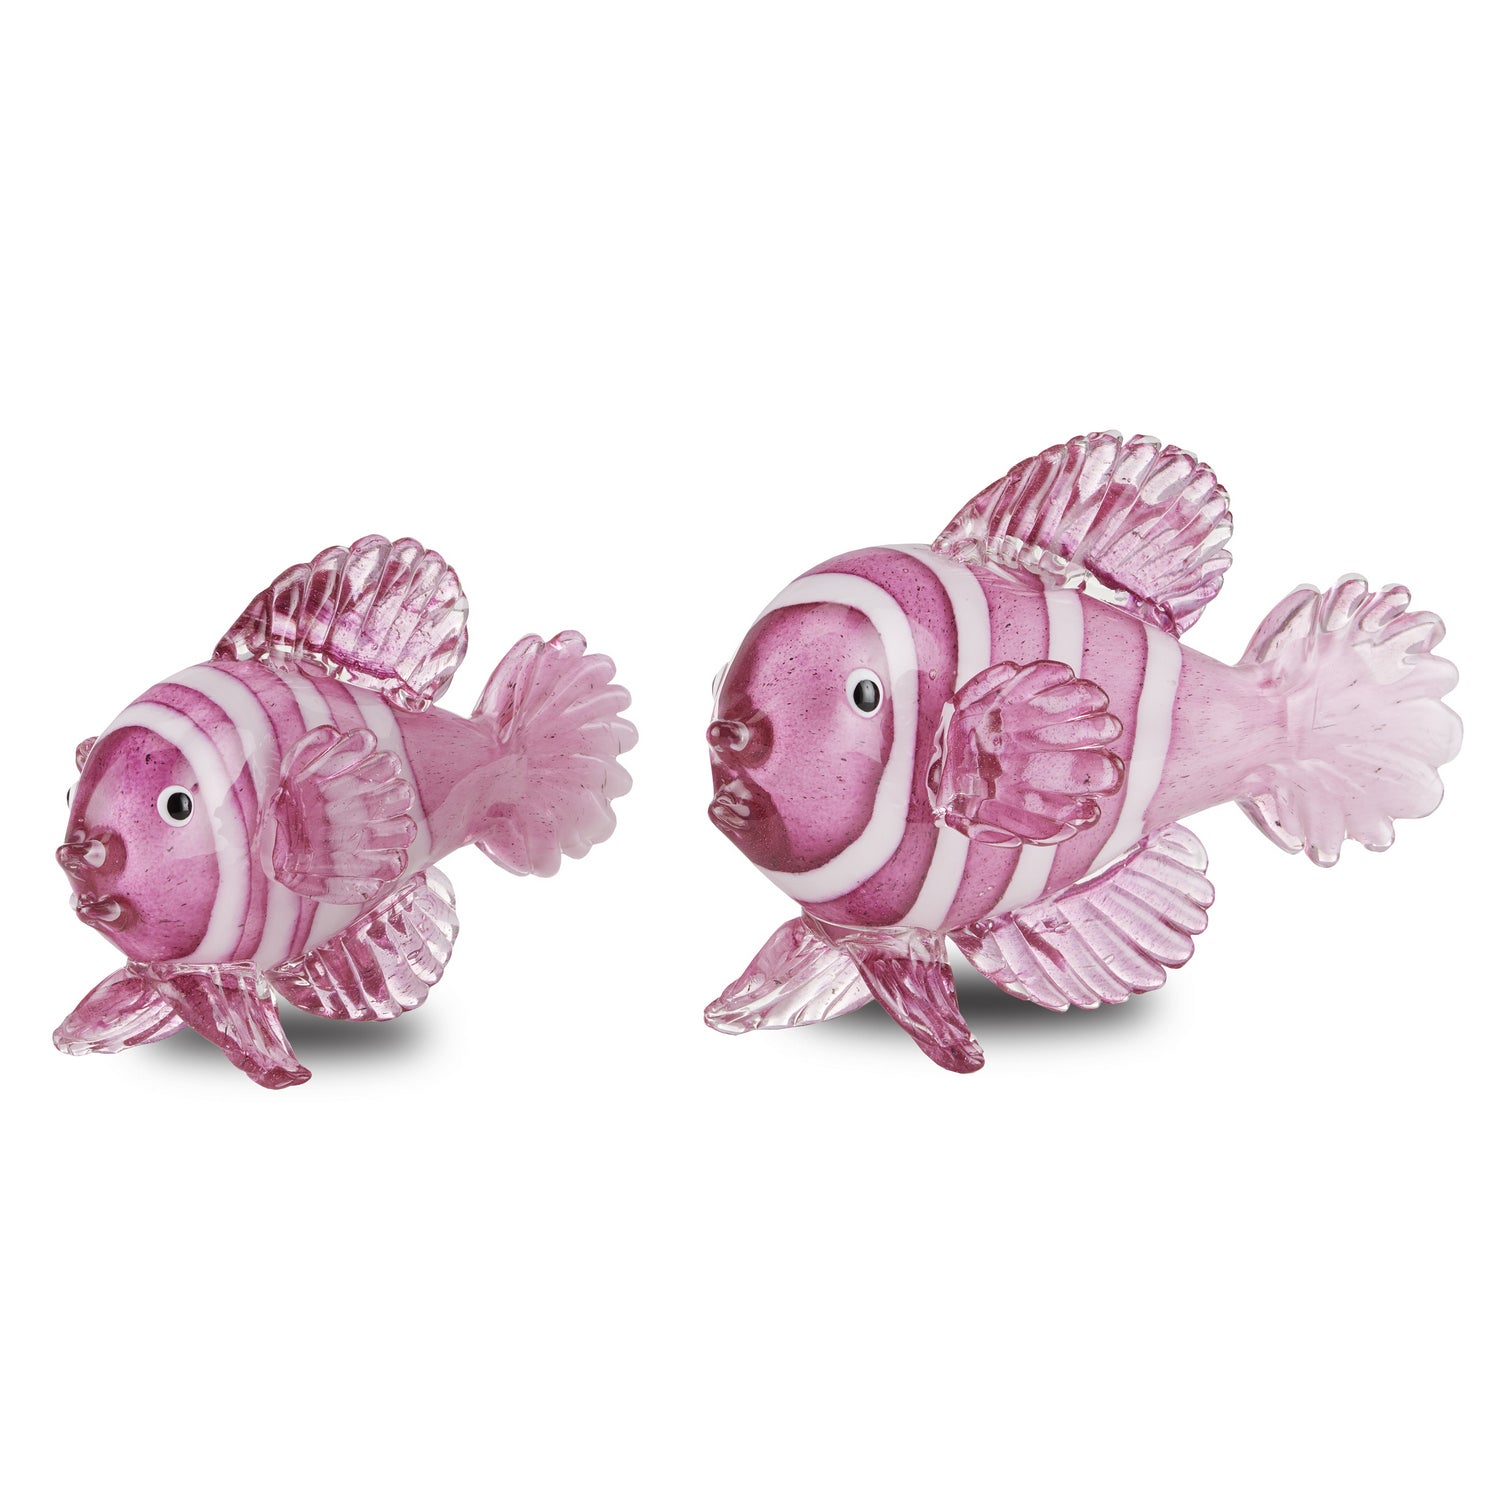 Fish Set of 2 from the Rialto collection in Pink/White finish